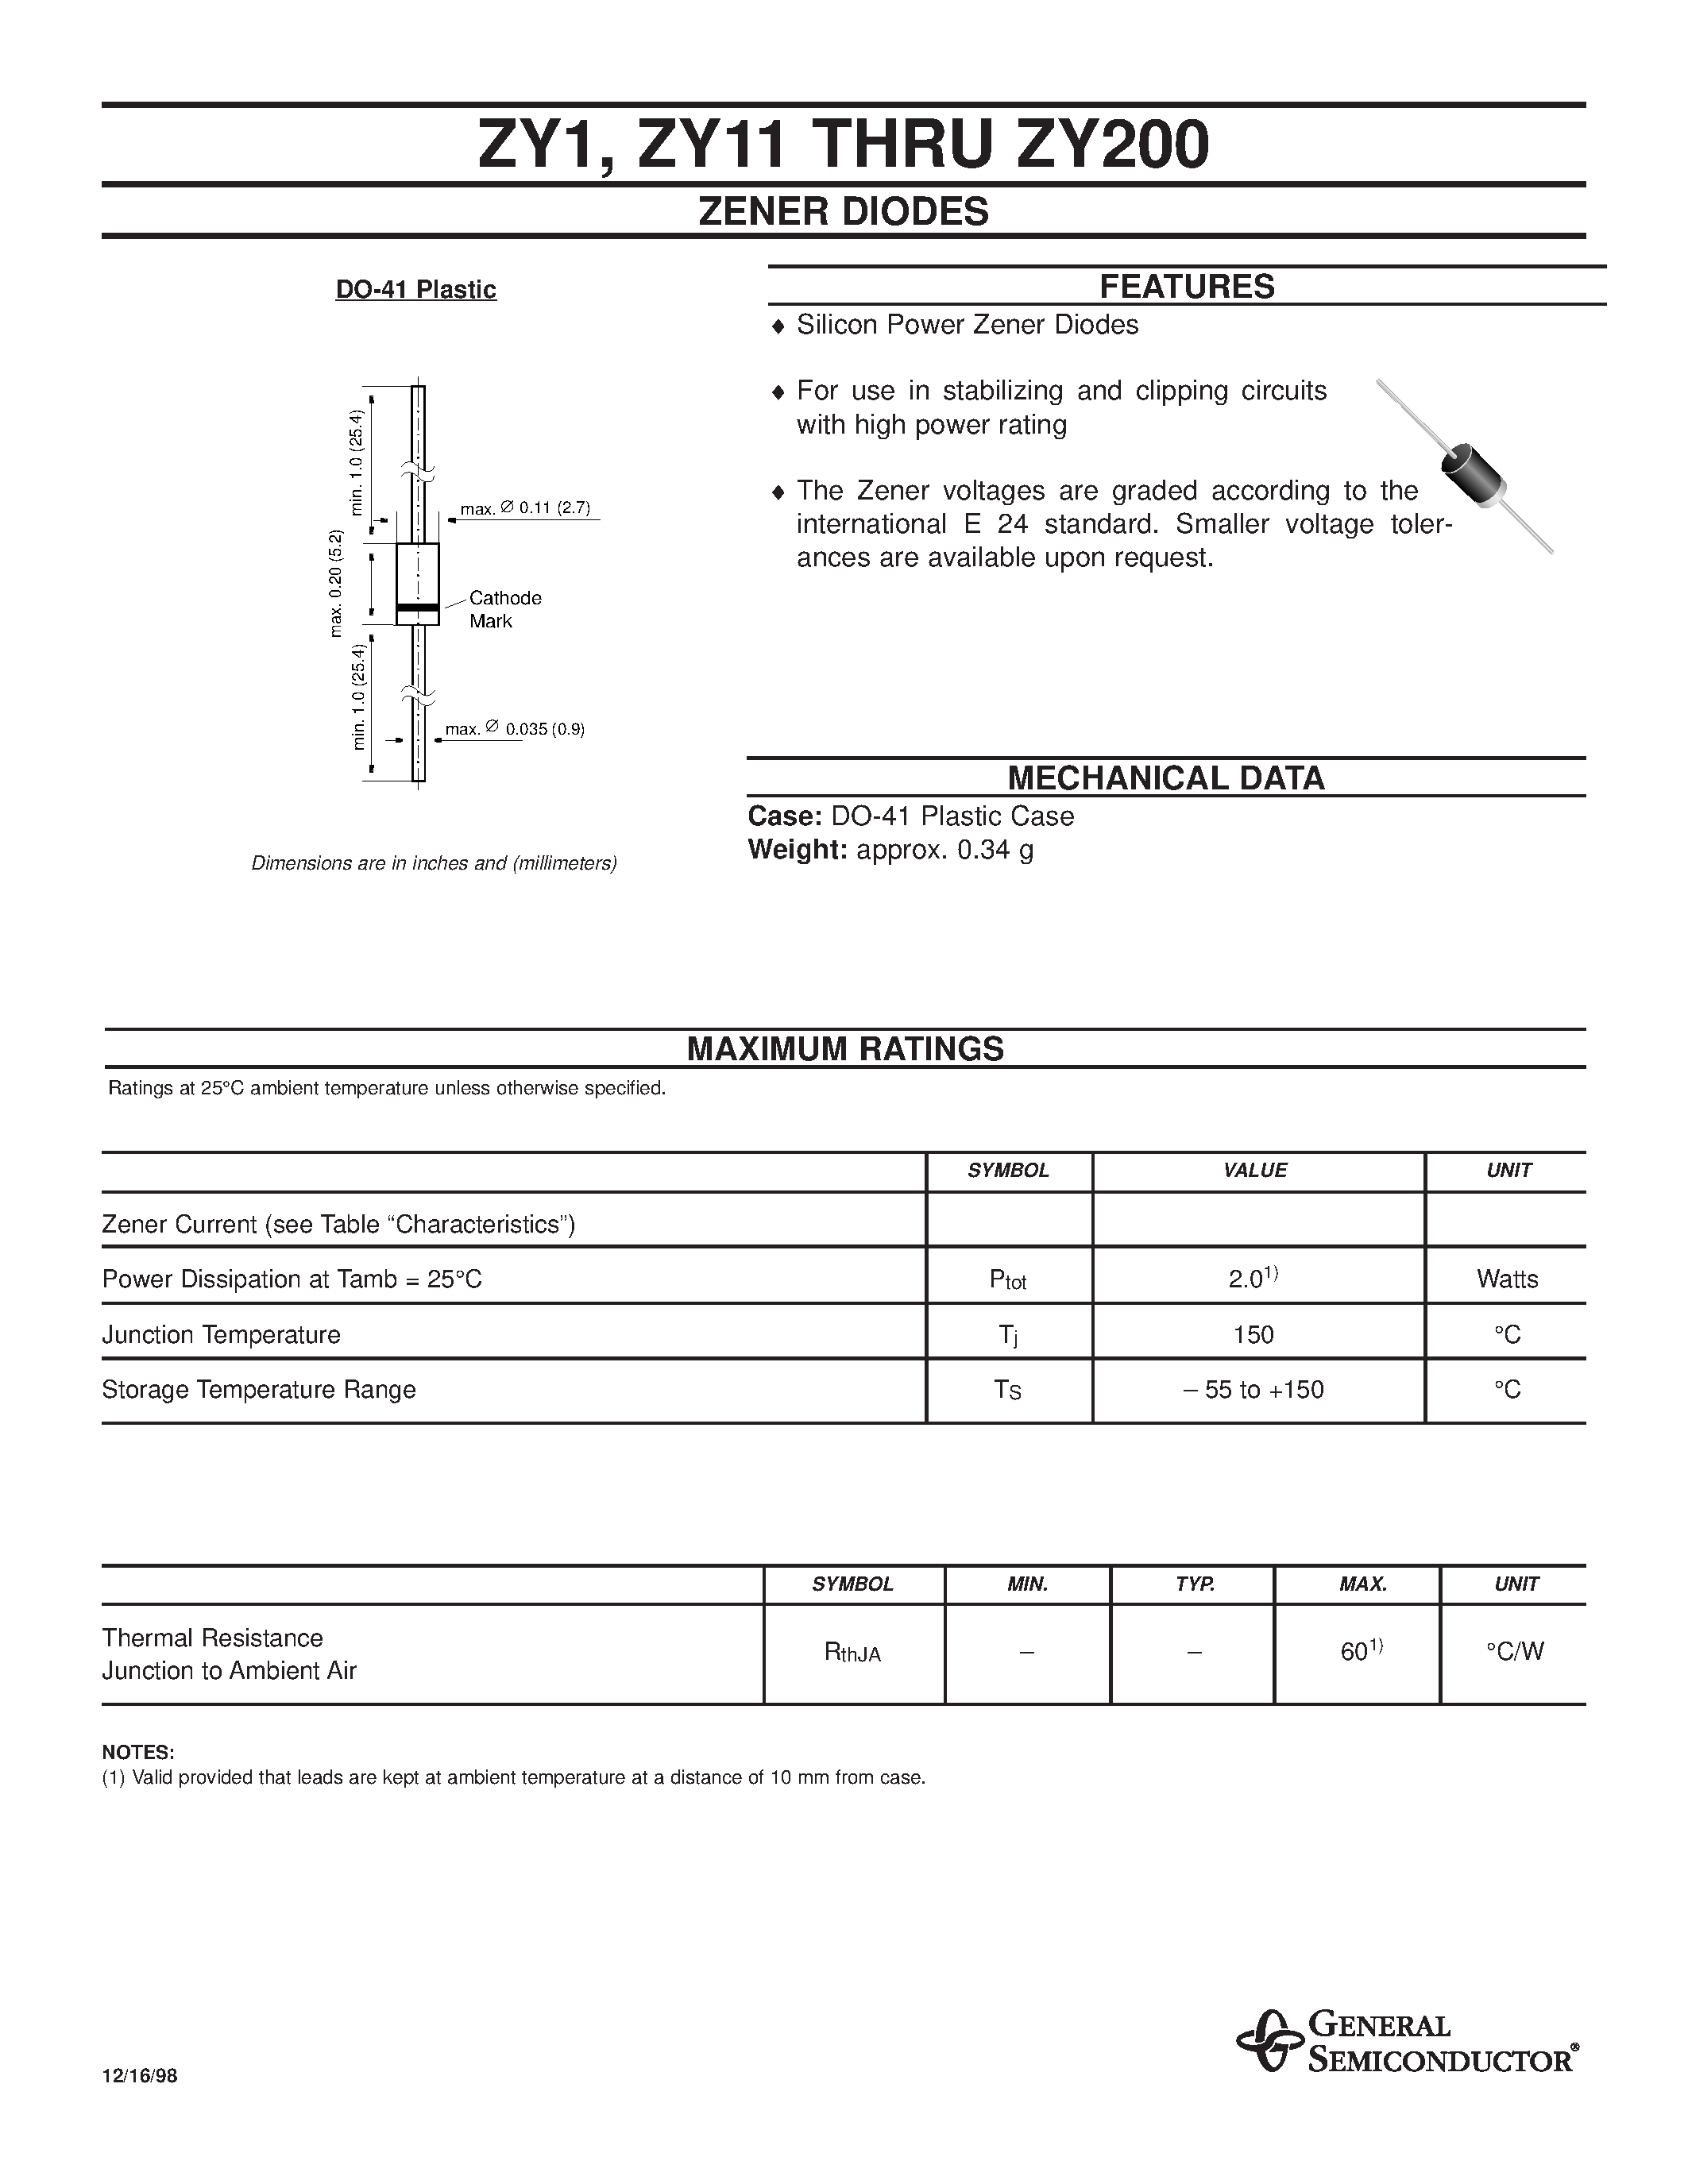 Datasheet ZY43 - ZENER DIODES page 1